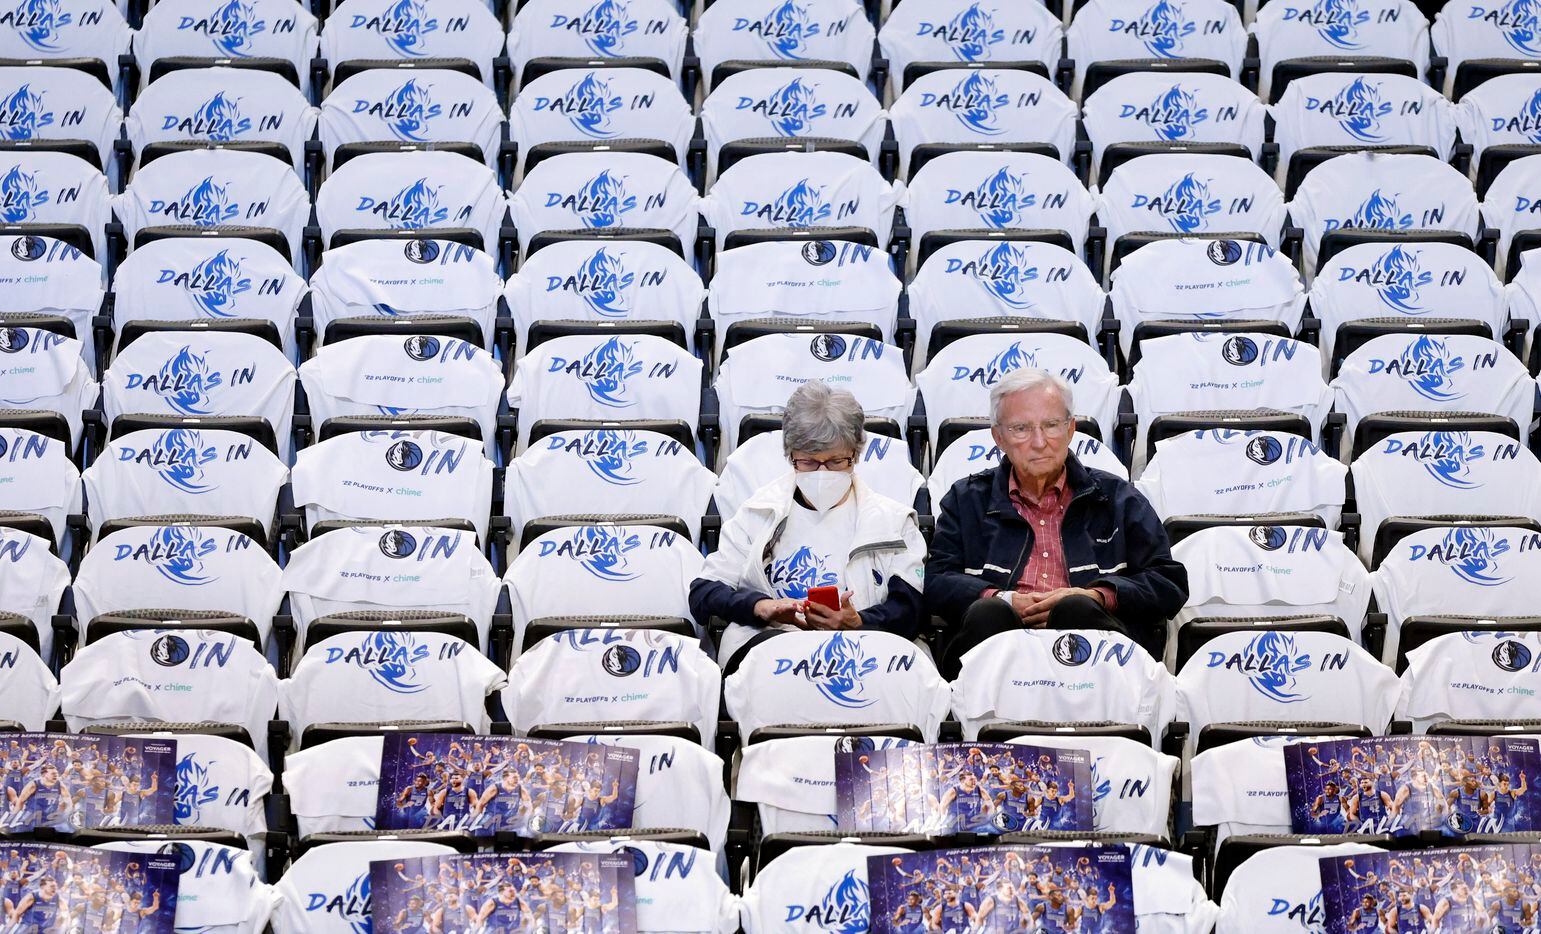 Dallas Mavericks fans arrive early to find their seats covered in white t-shirts before the...